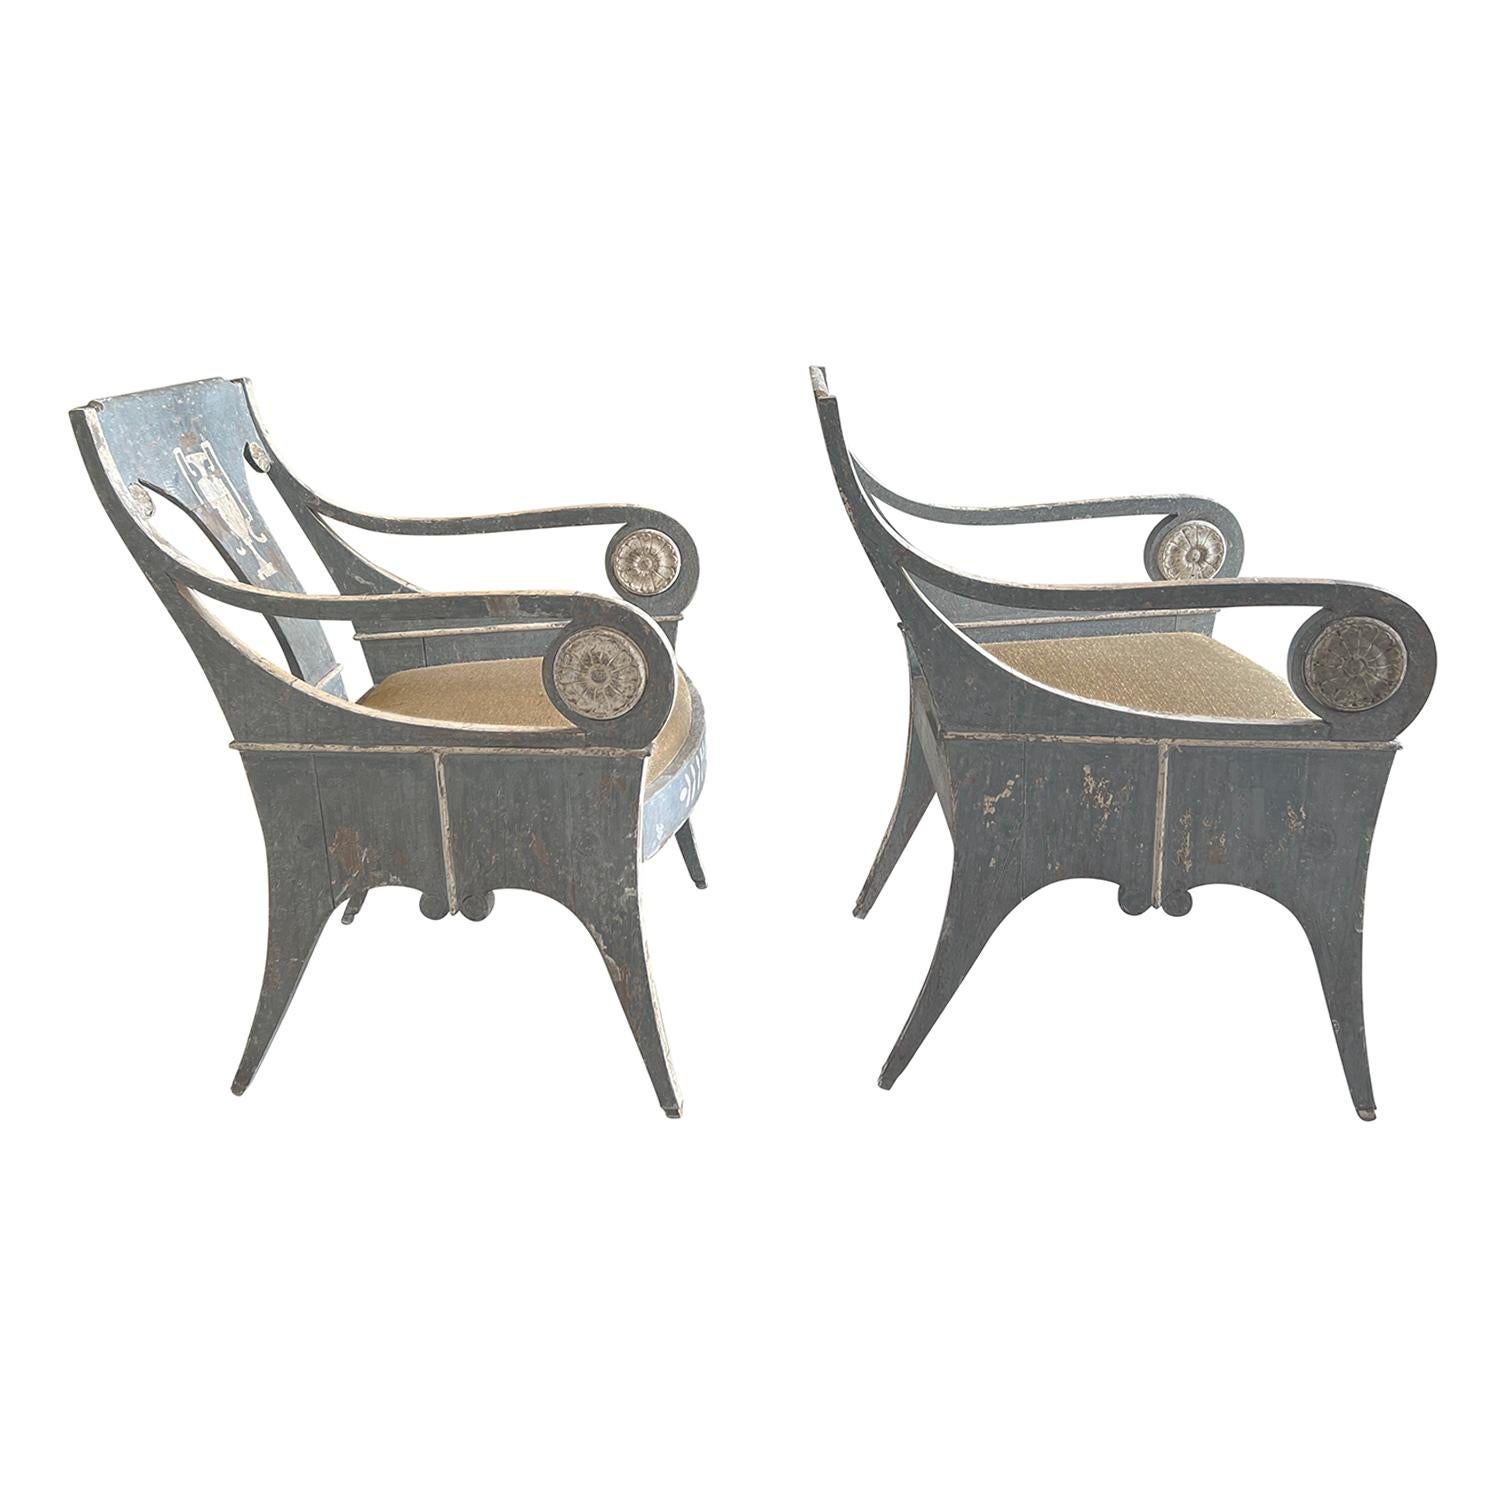 A pair of rare 19th century Swedish Gustavian fauteuils or armchairs made of handcrafted pinewood, patinated in a grey white finish with a hand painted white Greek Amphora urn hand painted onto the backrest and floral décor on the front of the seat,